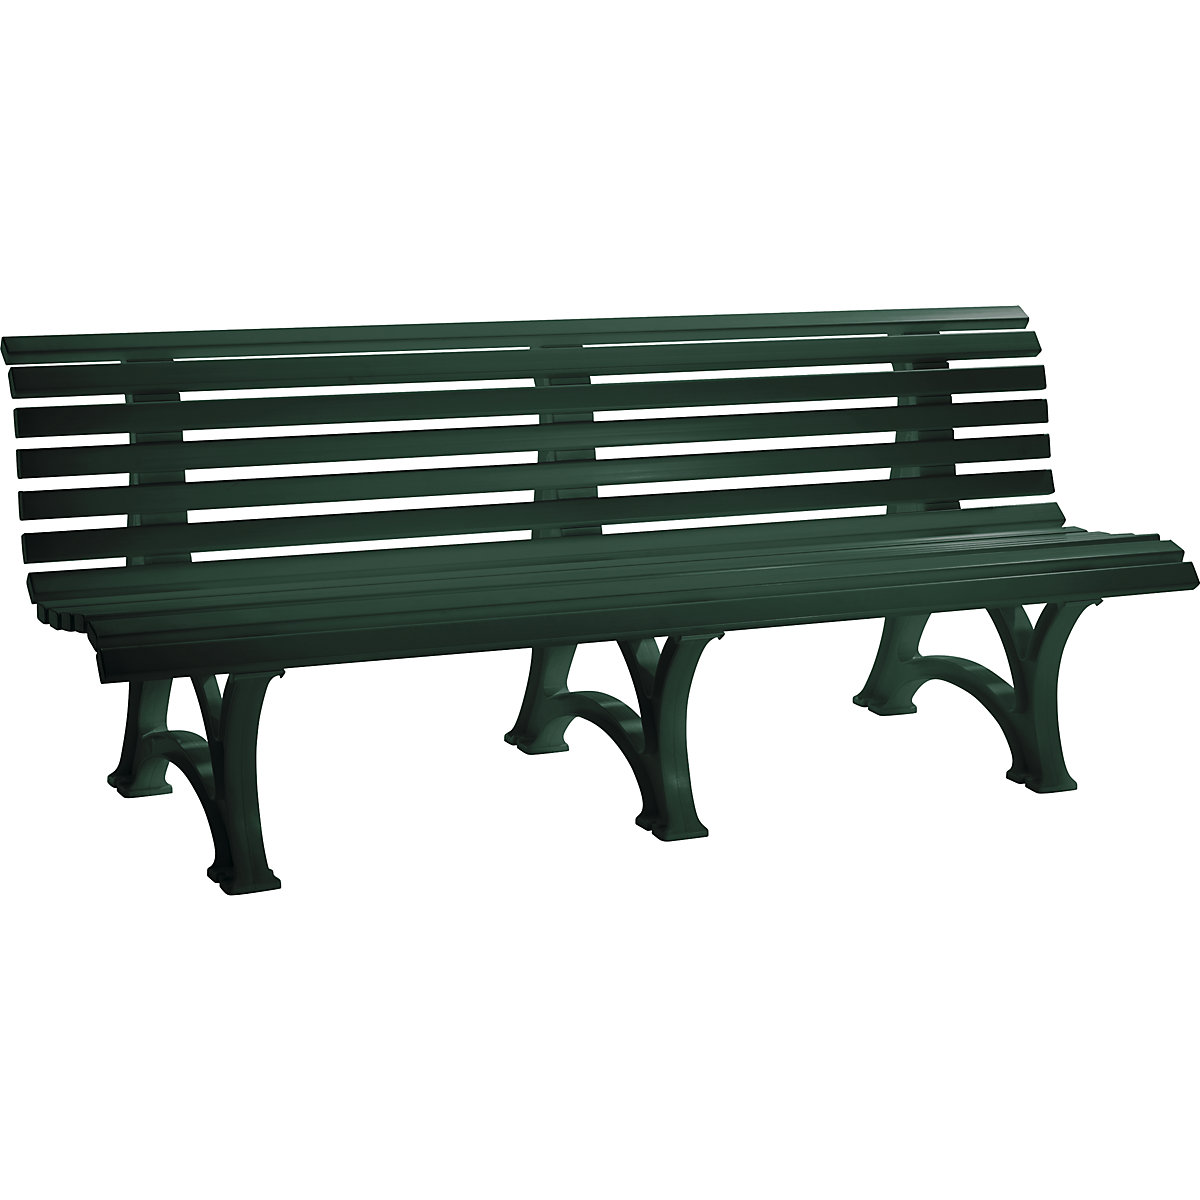 Park bench made of plastic, with 13 slats, width 2000 mm, moss green-5